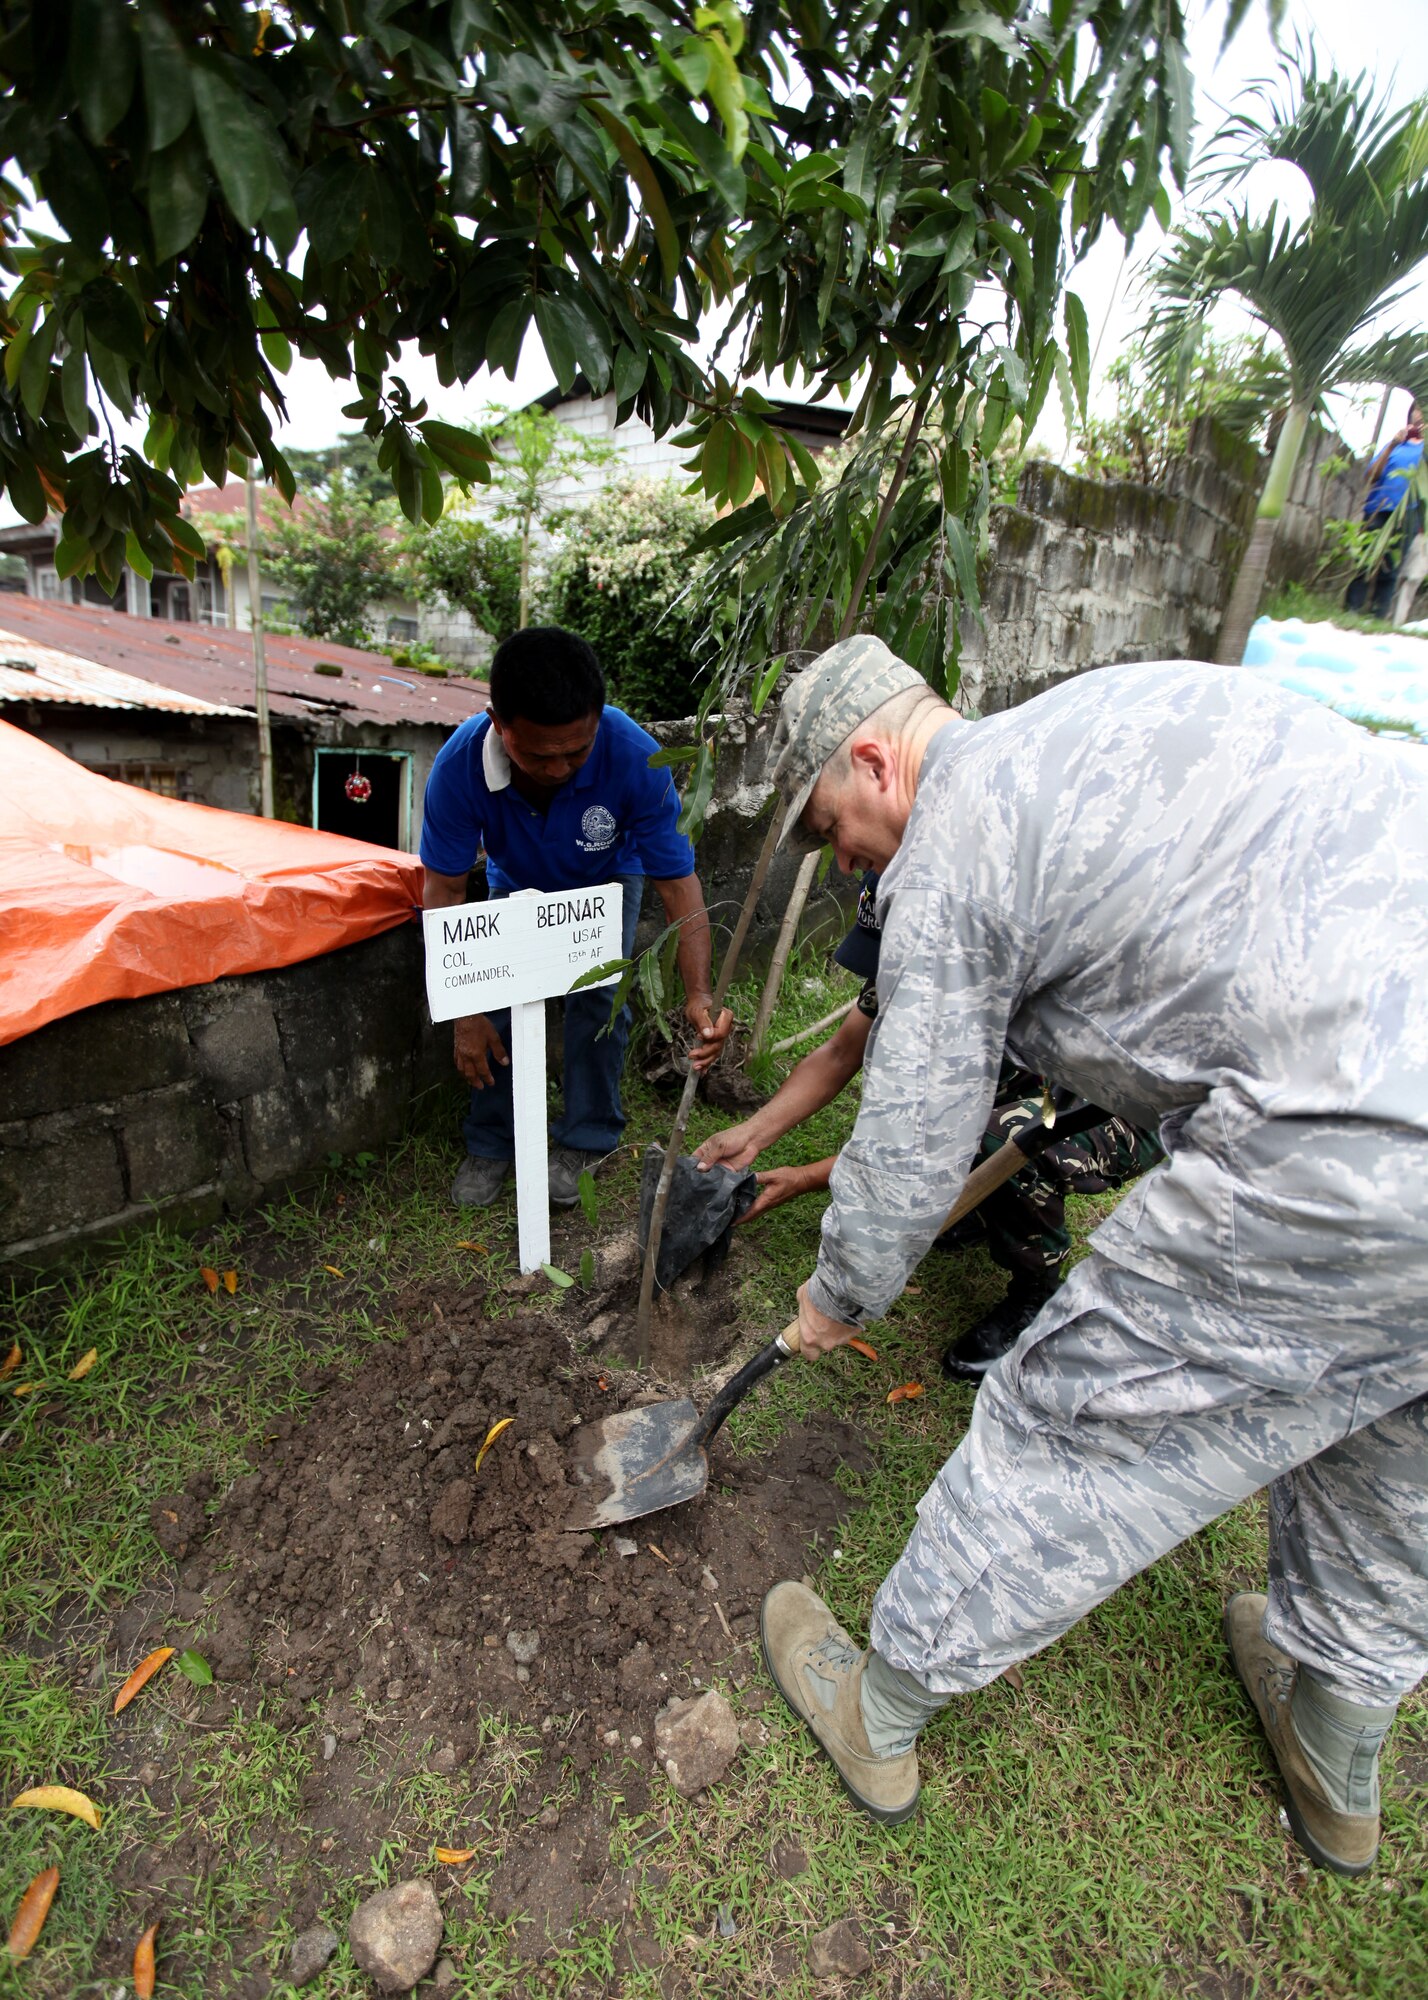 U.S. Air Force Col Mark Bednar plants a tree in his
honor during a dedication ceremony at Clark Air Force
Base, Republic of the Philippines on September 20,
2012. U.S. Air Force Civil Engineering Squad 647 out of
Joint Base Pearl Harbor teamed up with the Republic of
the Philippines Air Force to build an addition onto a
local schoolhouse before dedicating it to the
community. The U.S. military and Republic of the
Philippines military work together to strengthen
interoperability between the Philippine and U.S.
government. (U.S. Marine Corps photo by LCpl Katelyn
Hunter/Released).